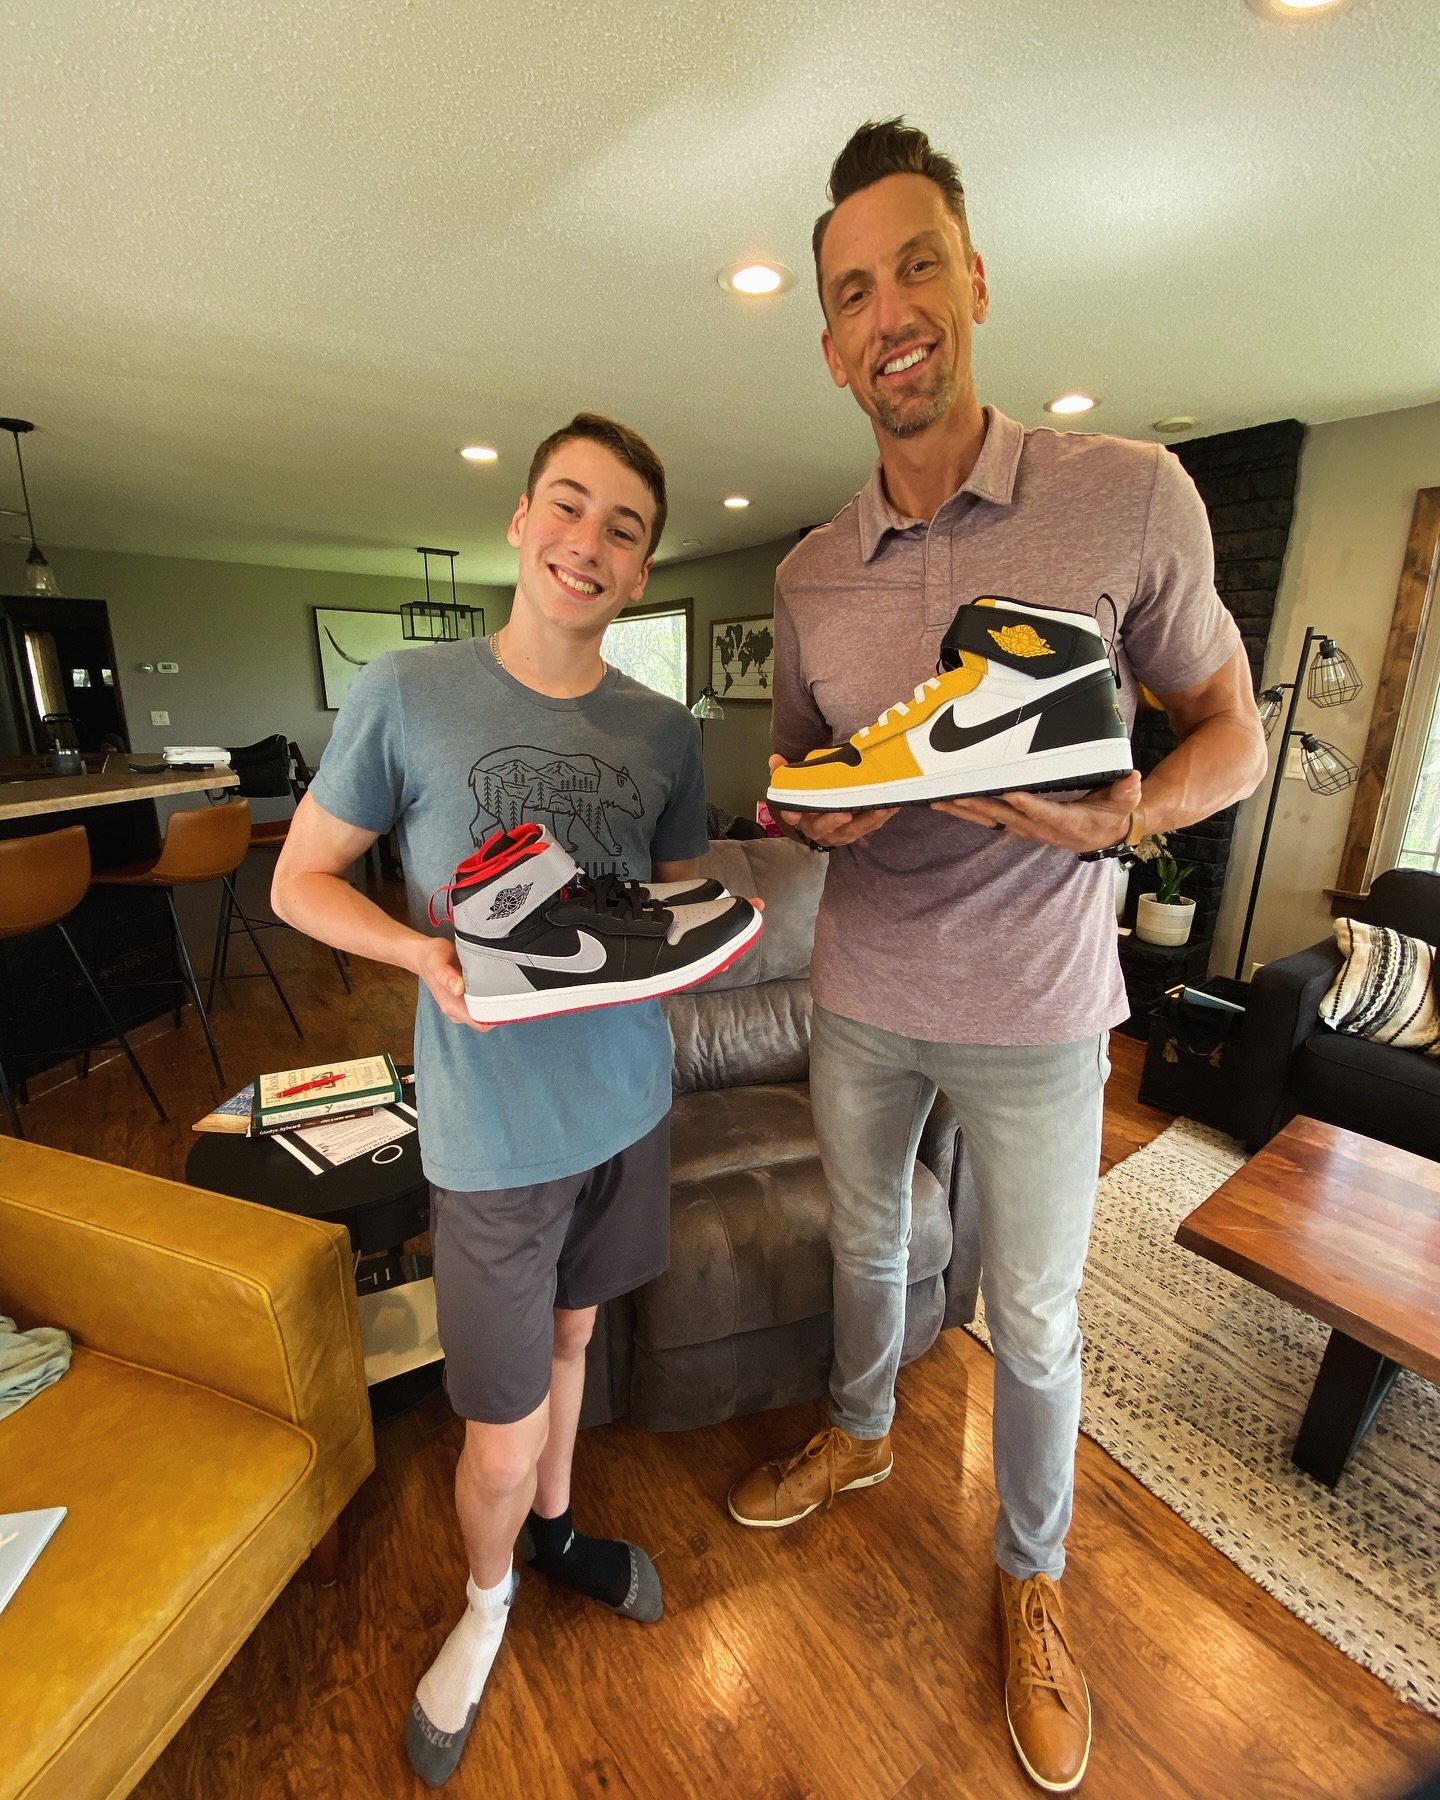 Big day for the Sebesta men! First pair of J&rsquo;s for the boy. First pair of J&rsquo;s for me since 1996. Old school.